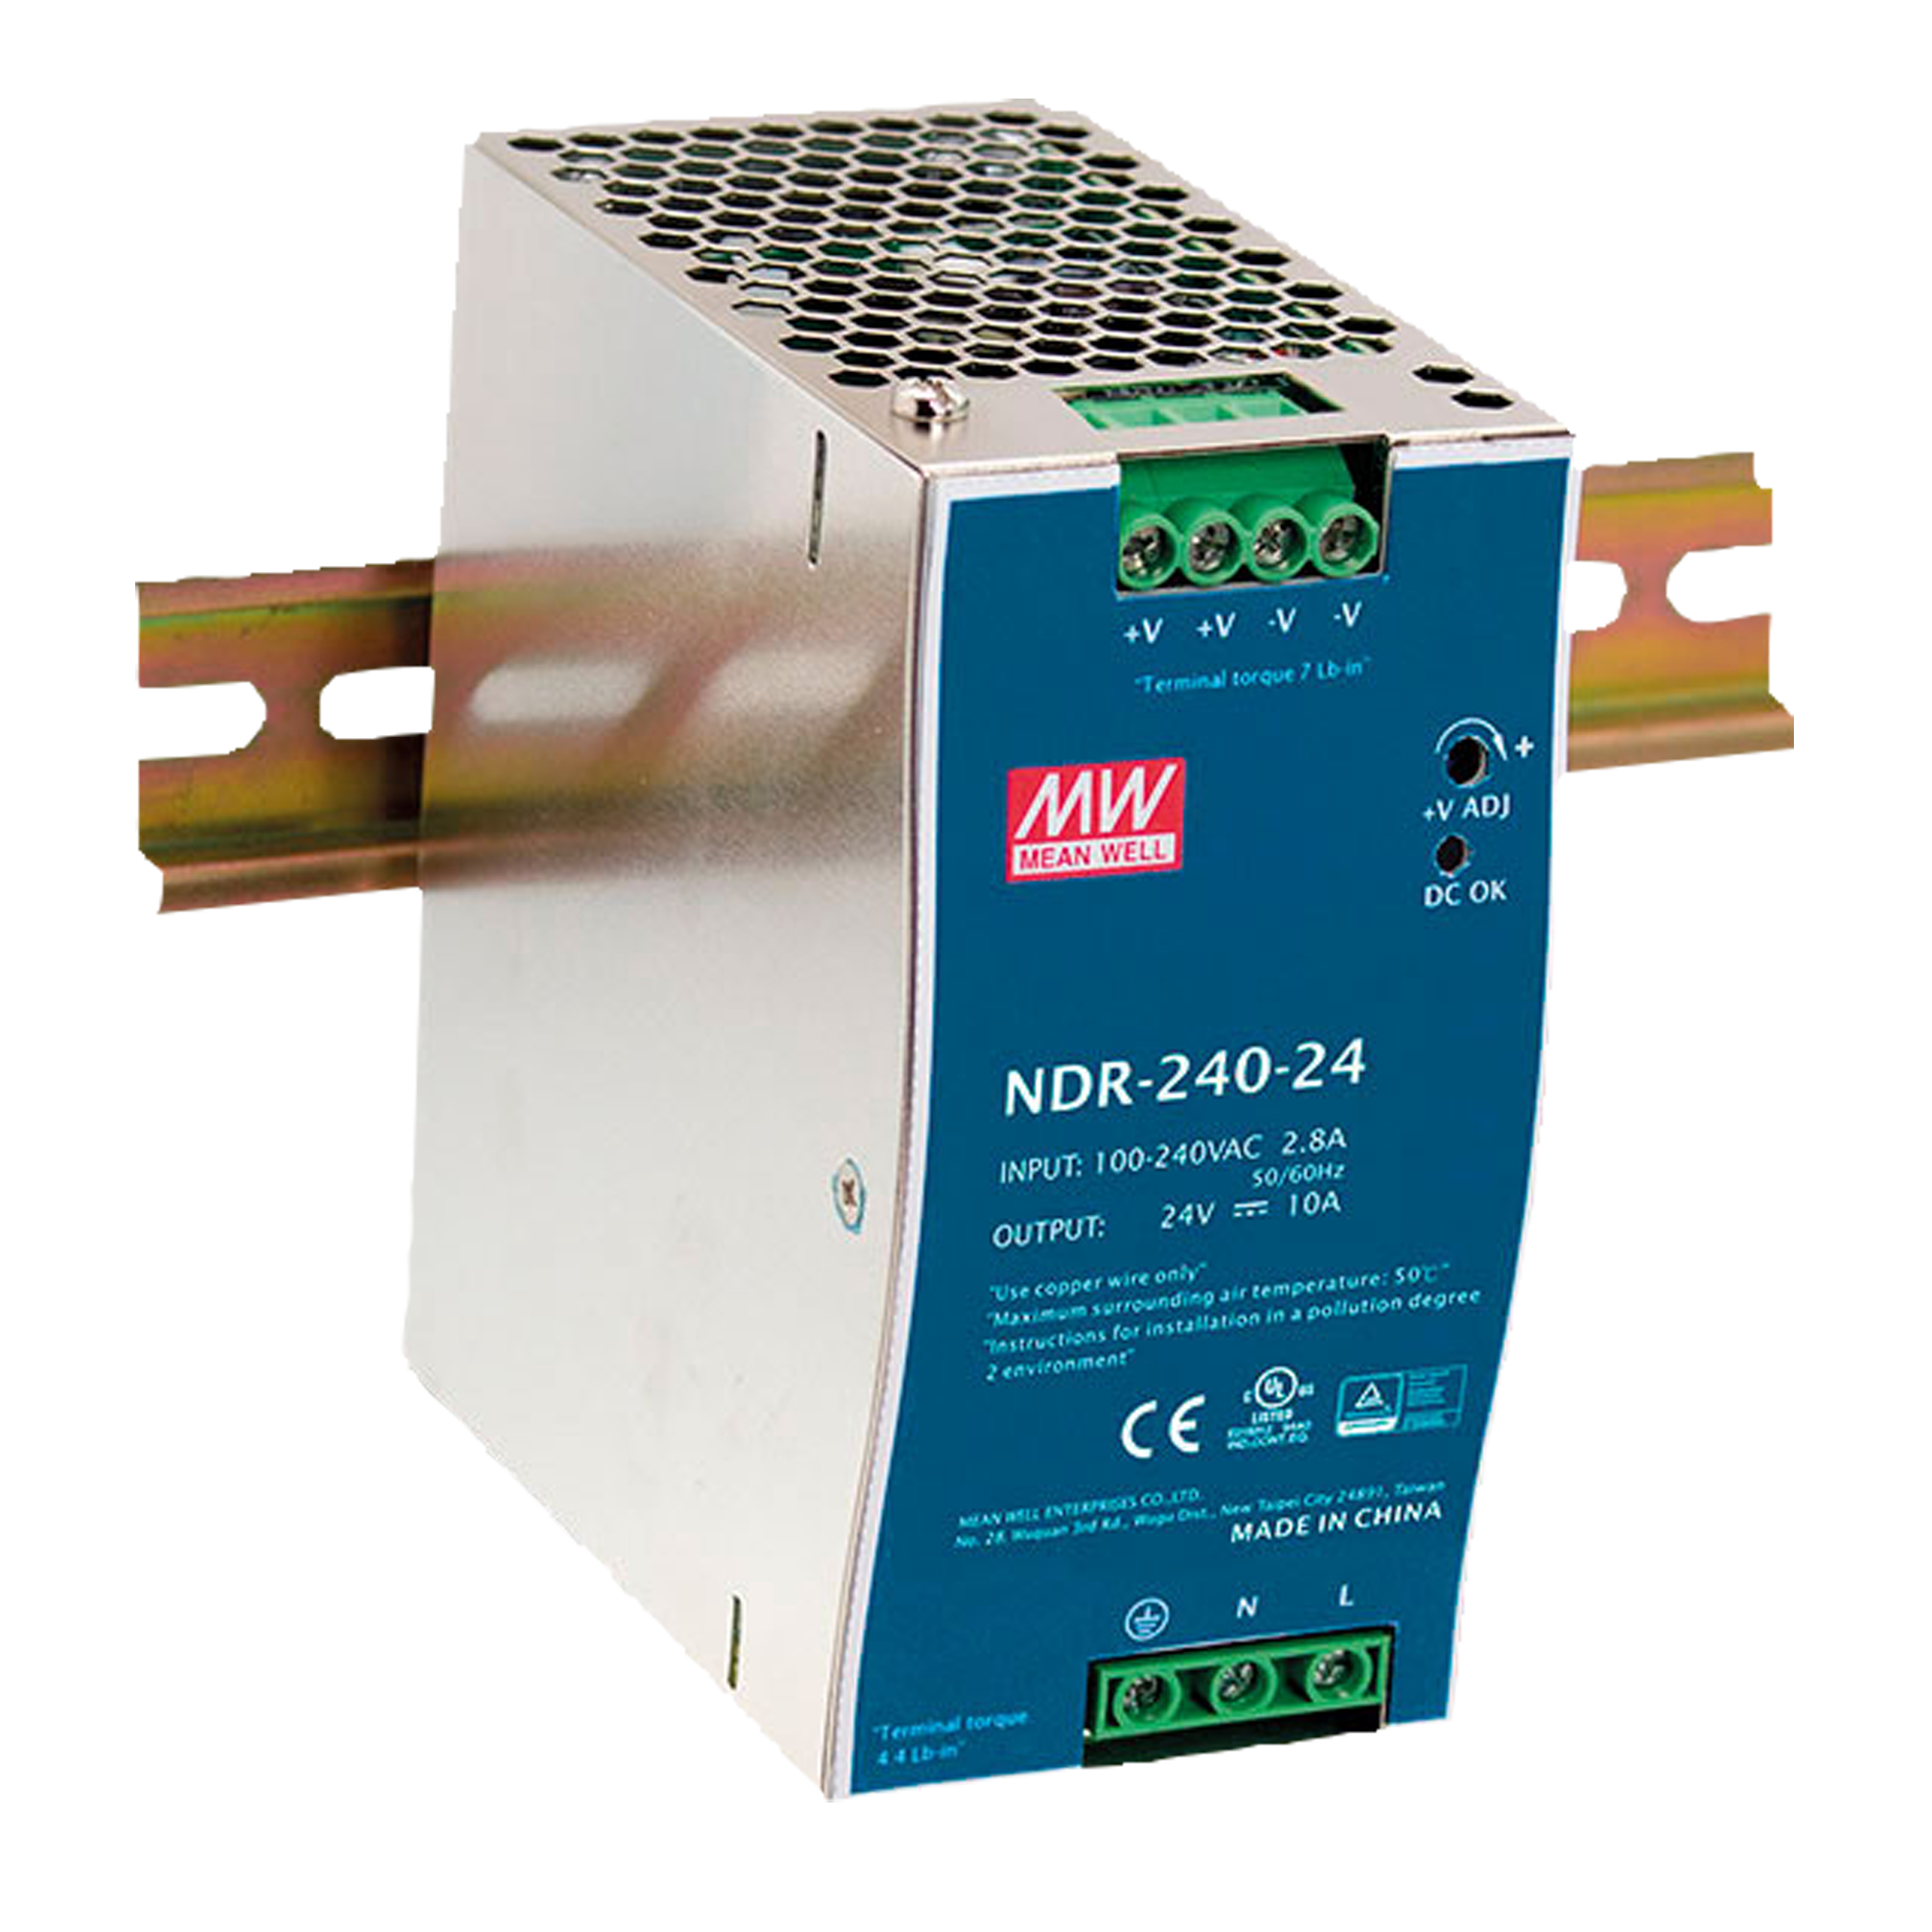 Meanwell DIN Rail Power Supply 240 W/24 V DC Mean Well NDR-240-25